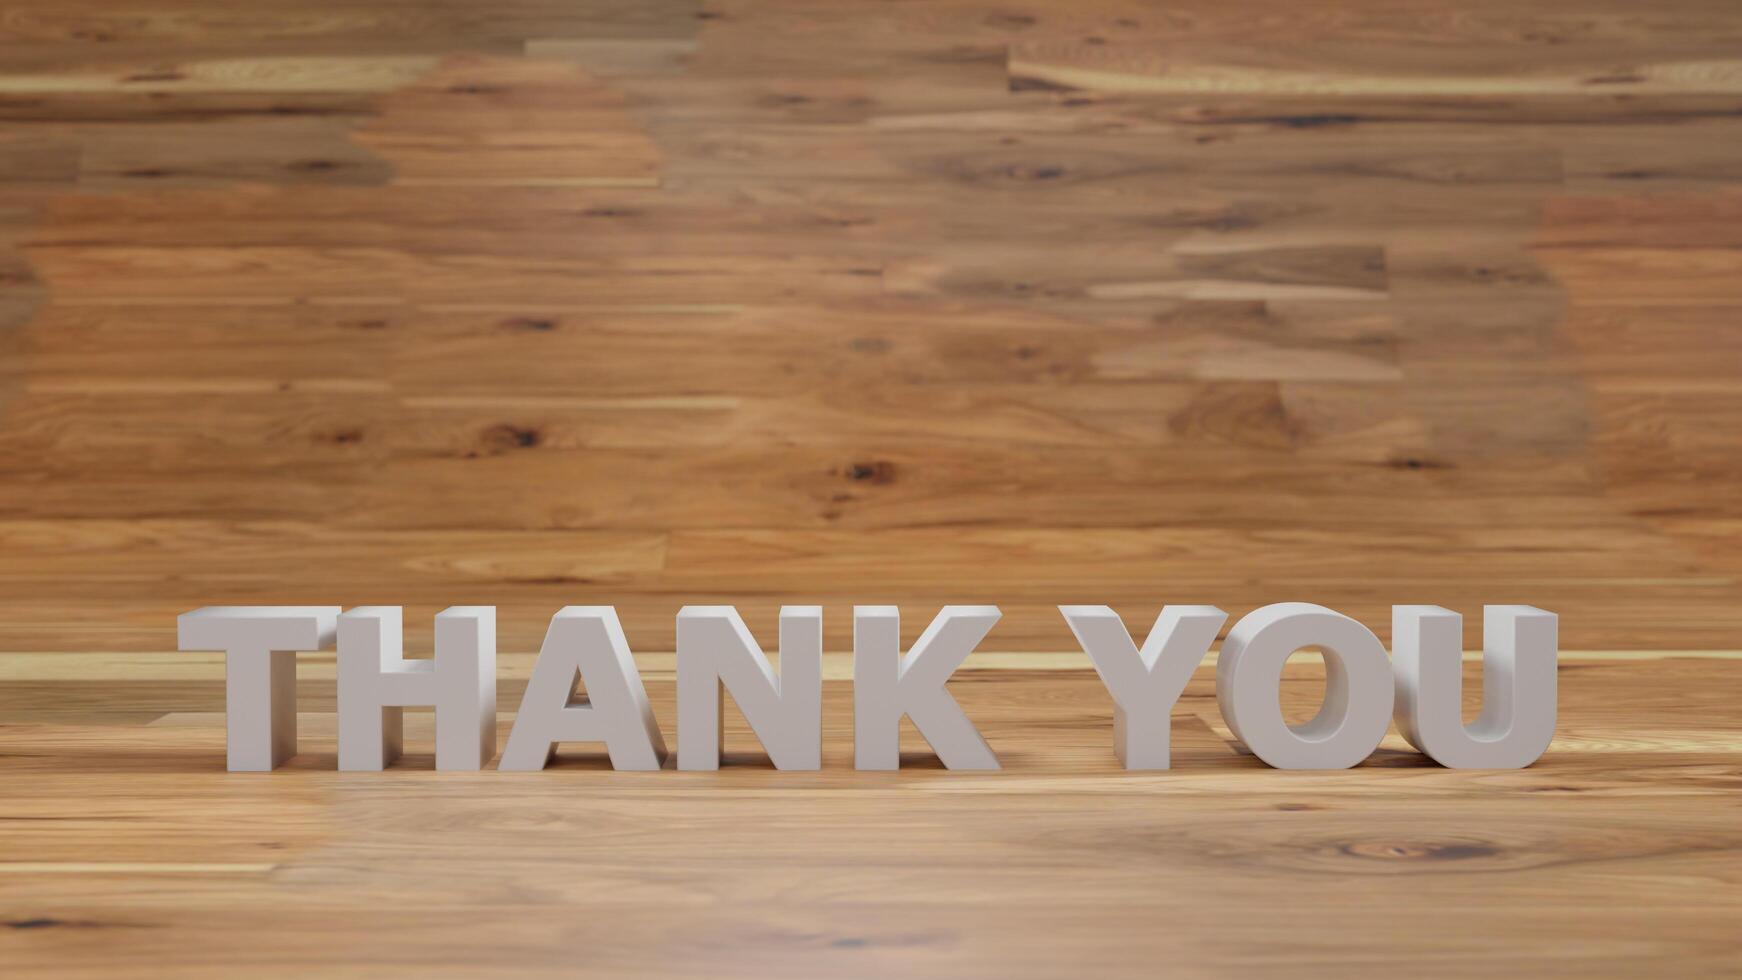 Thank you sign text object , 3D illustration rendering photo